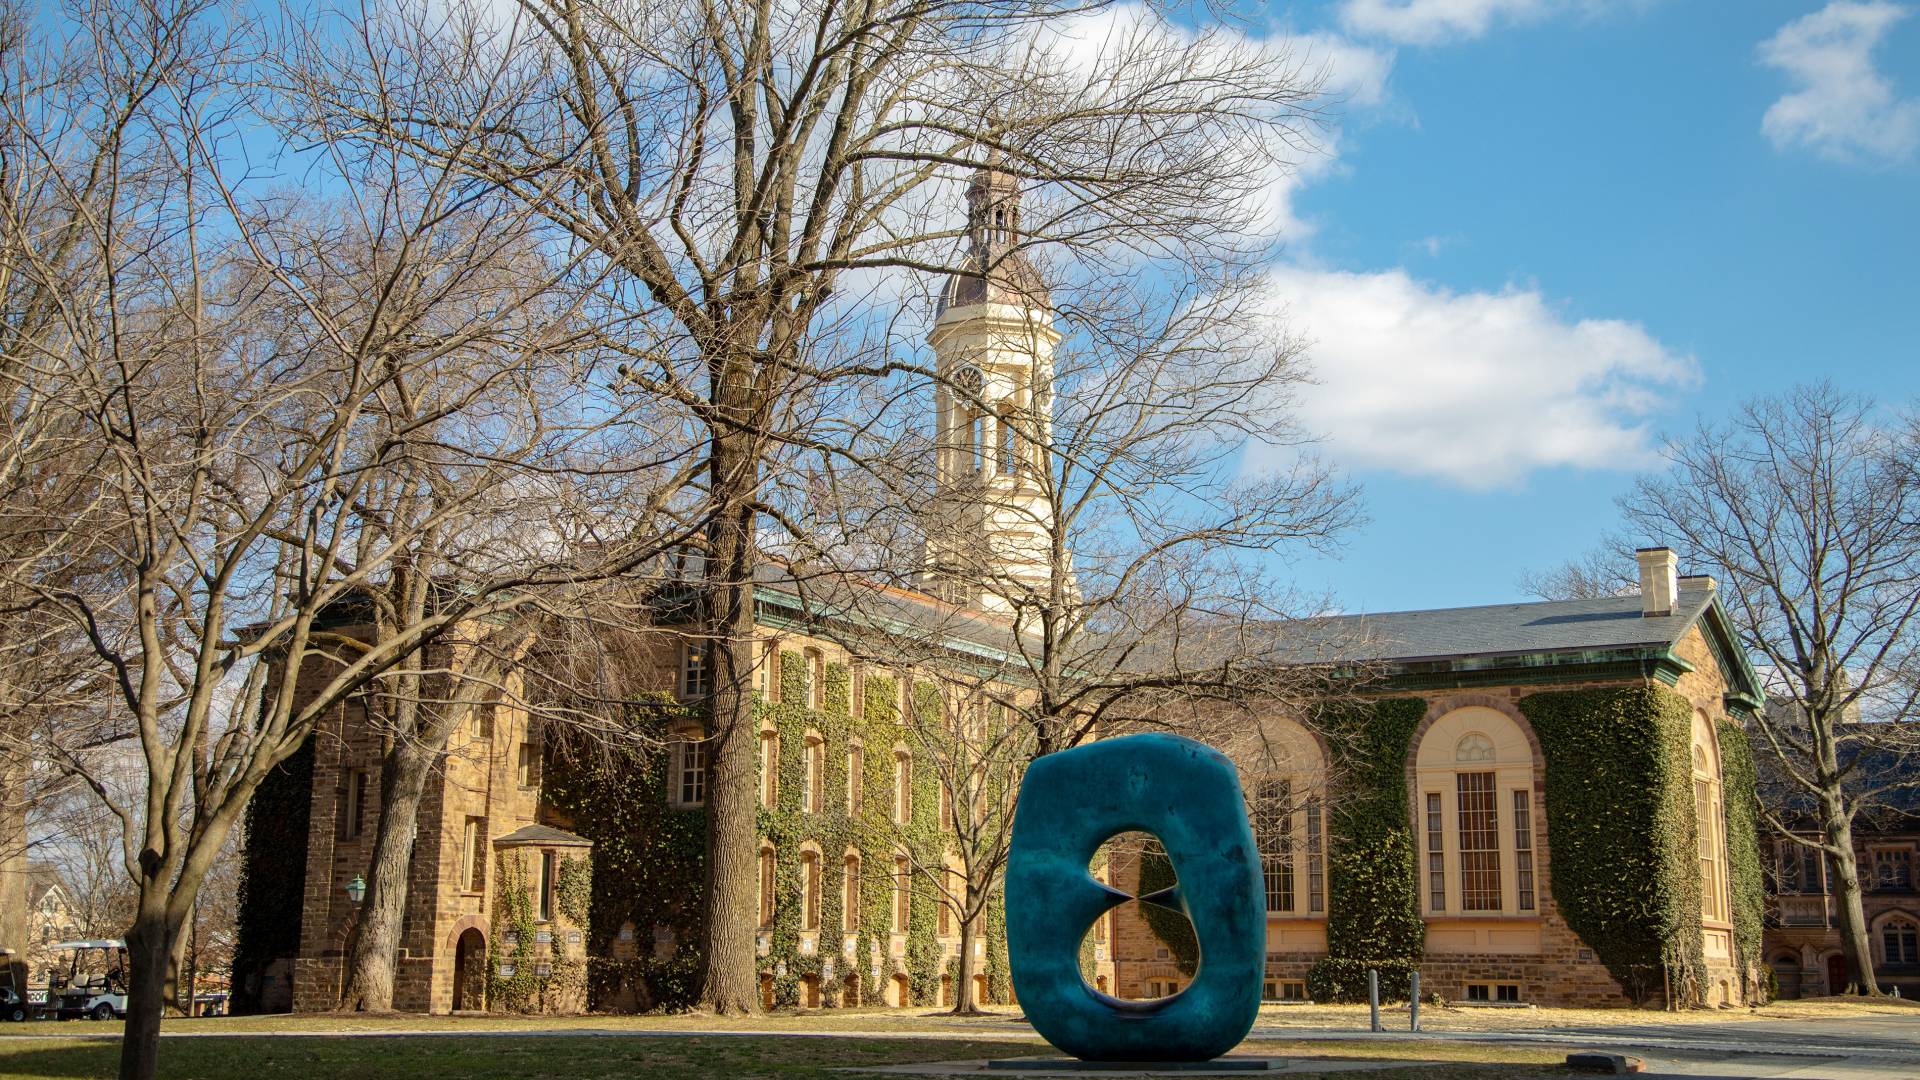 Nassau Hall and sculpture "Oval with Points"